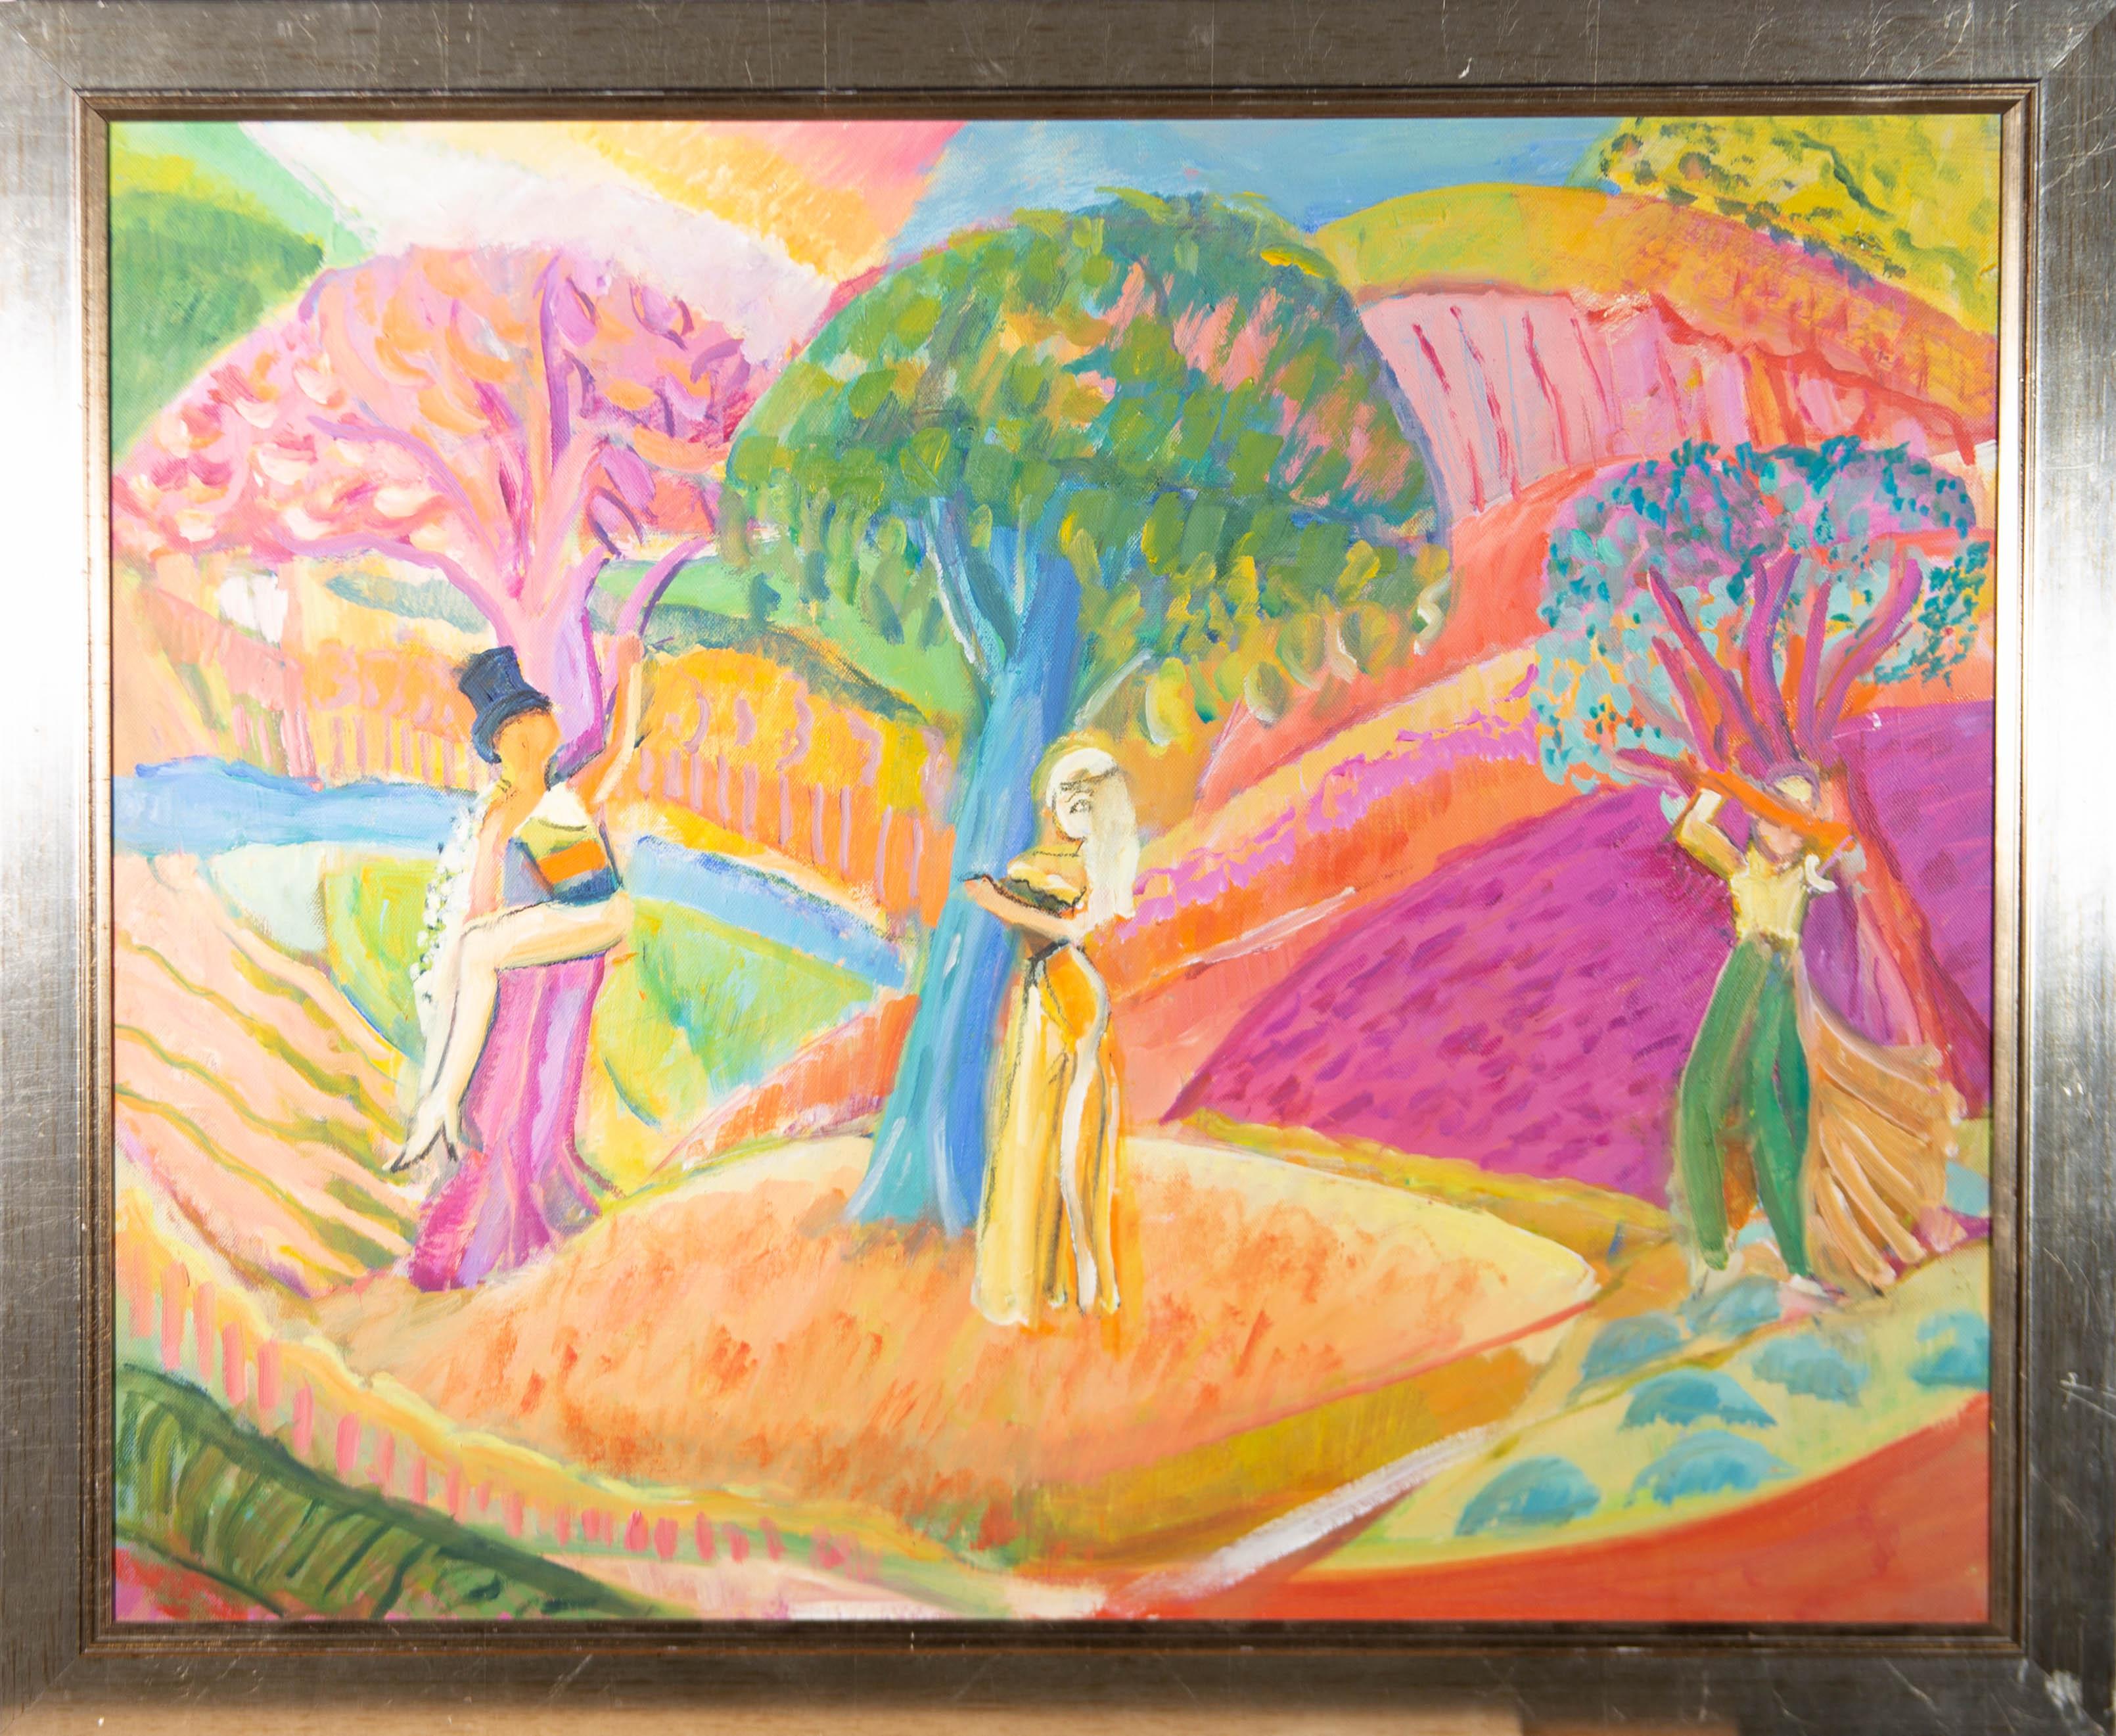 A vibrant study by the British artist Susan Paine depicting three female figures in a landscape. Each figure leans against a tree with rolling hills and flowers surrounding them. Well presented in a gilt effect frame. Unsigned. On canvas on